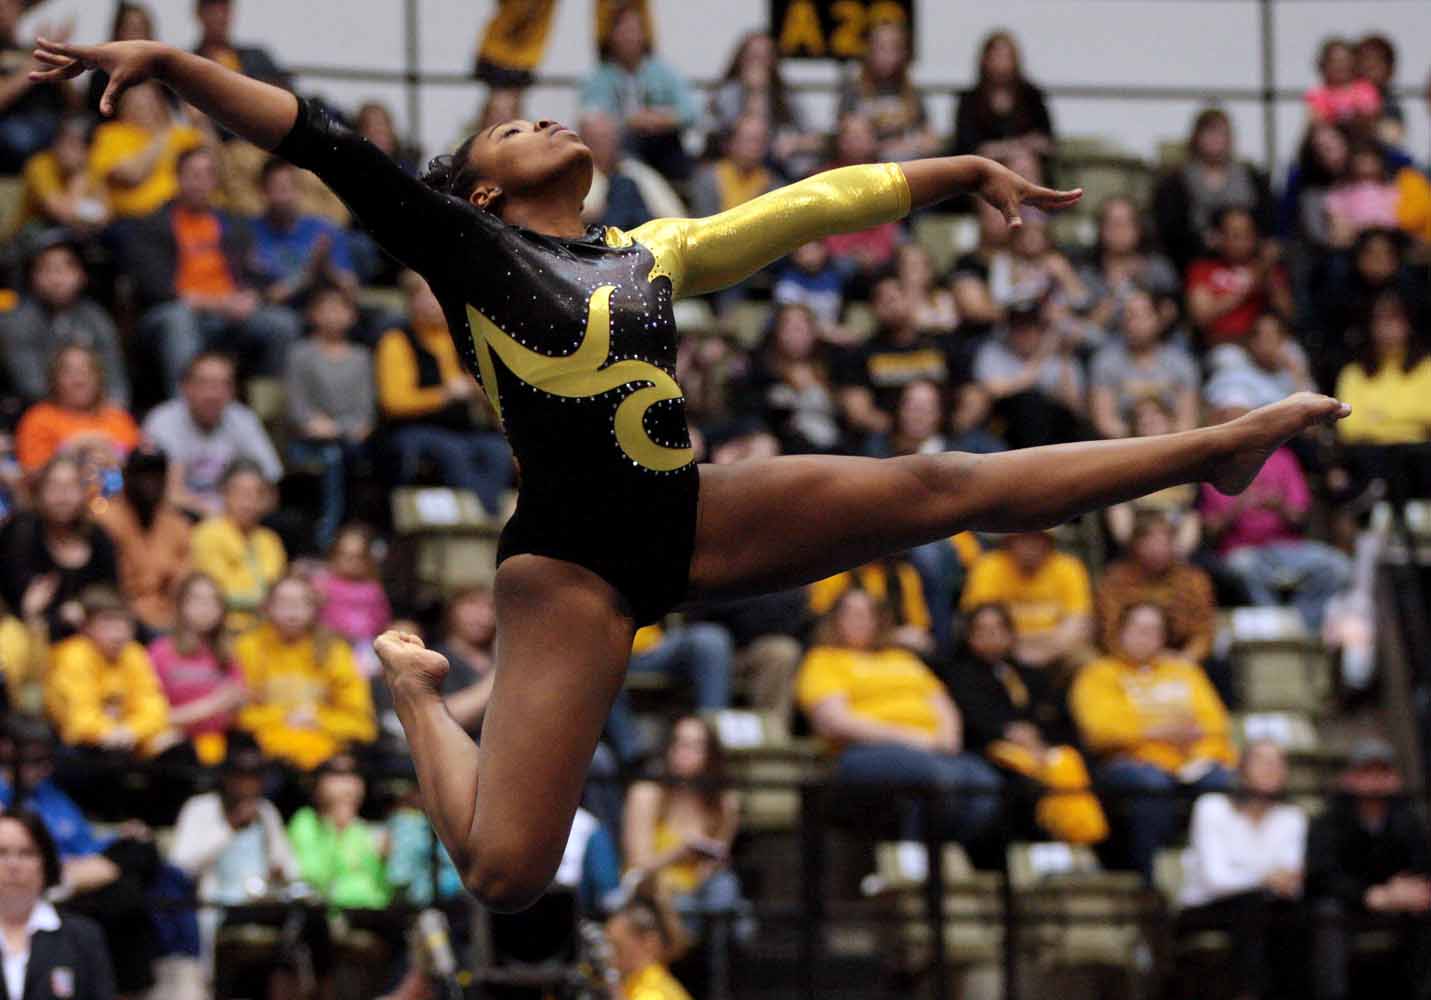 Mizzou sophomore Kennedi Harris leaps into a pose during her floor routine Friday evening, Feb. 19, 2016 at the Hearnes Center near the end of the gymnastics competition against the University of Florida.